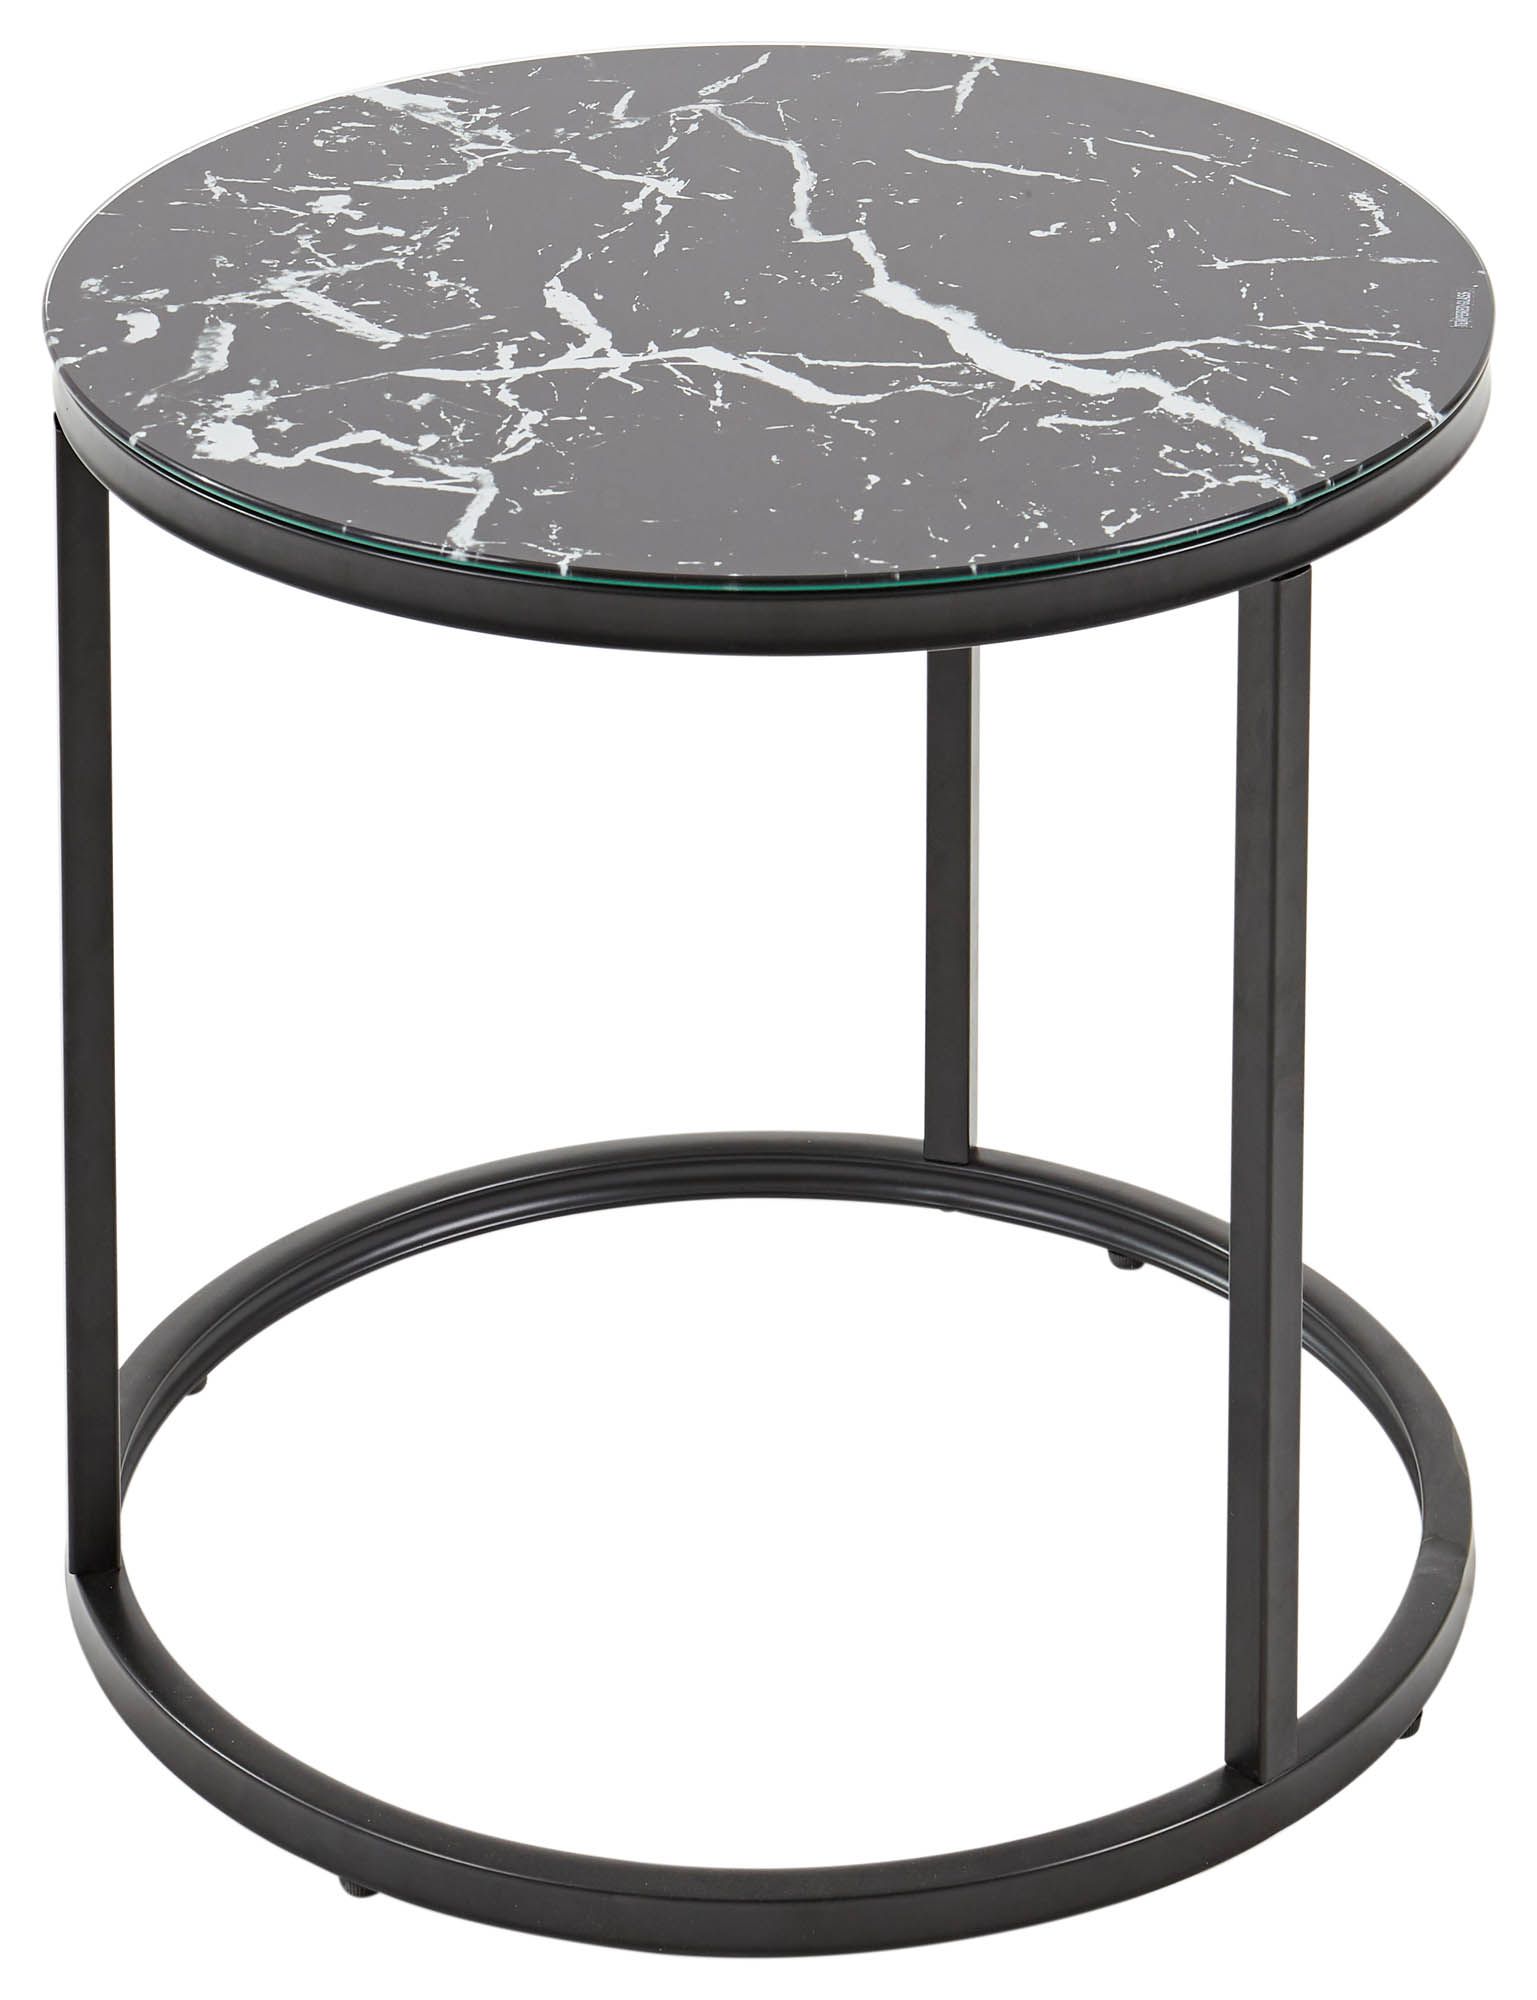 Table d'appoint FARUM